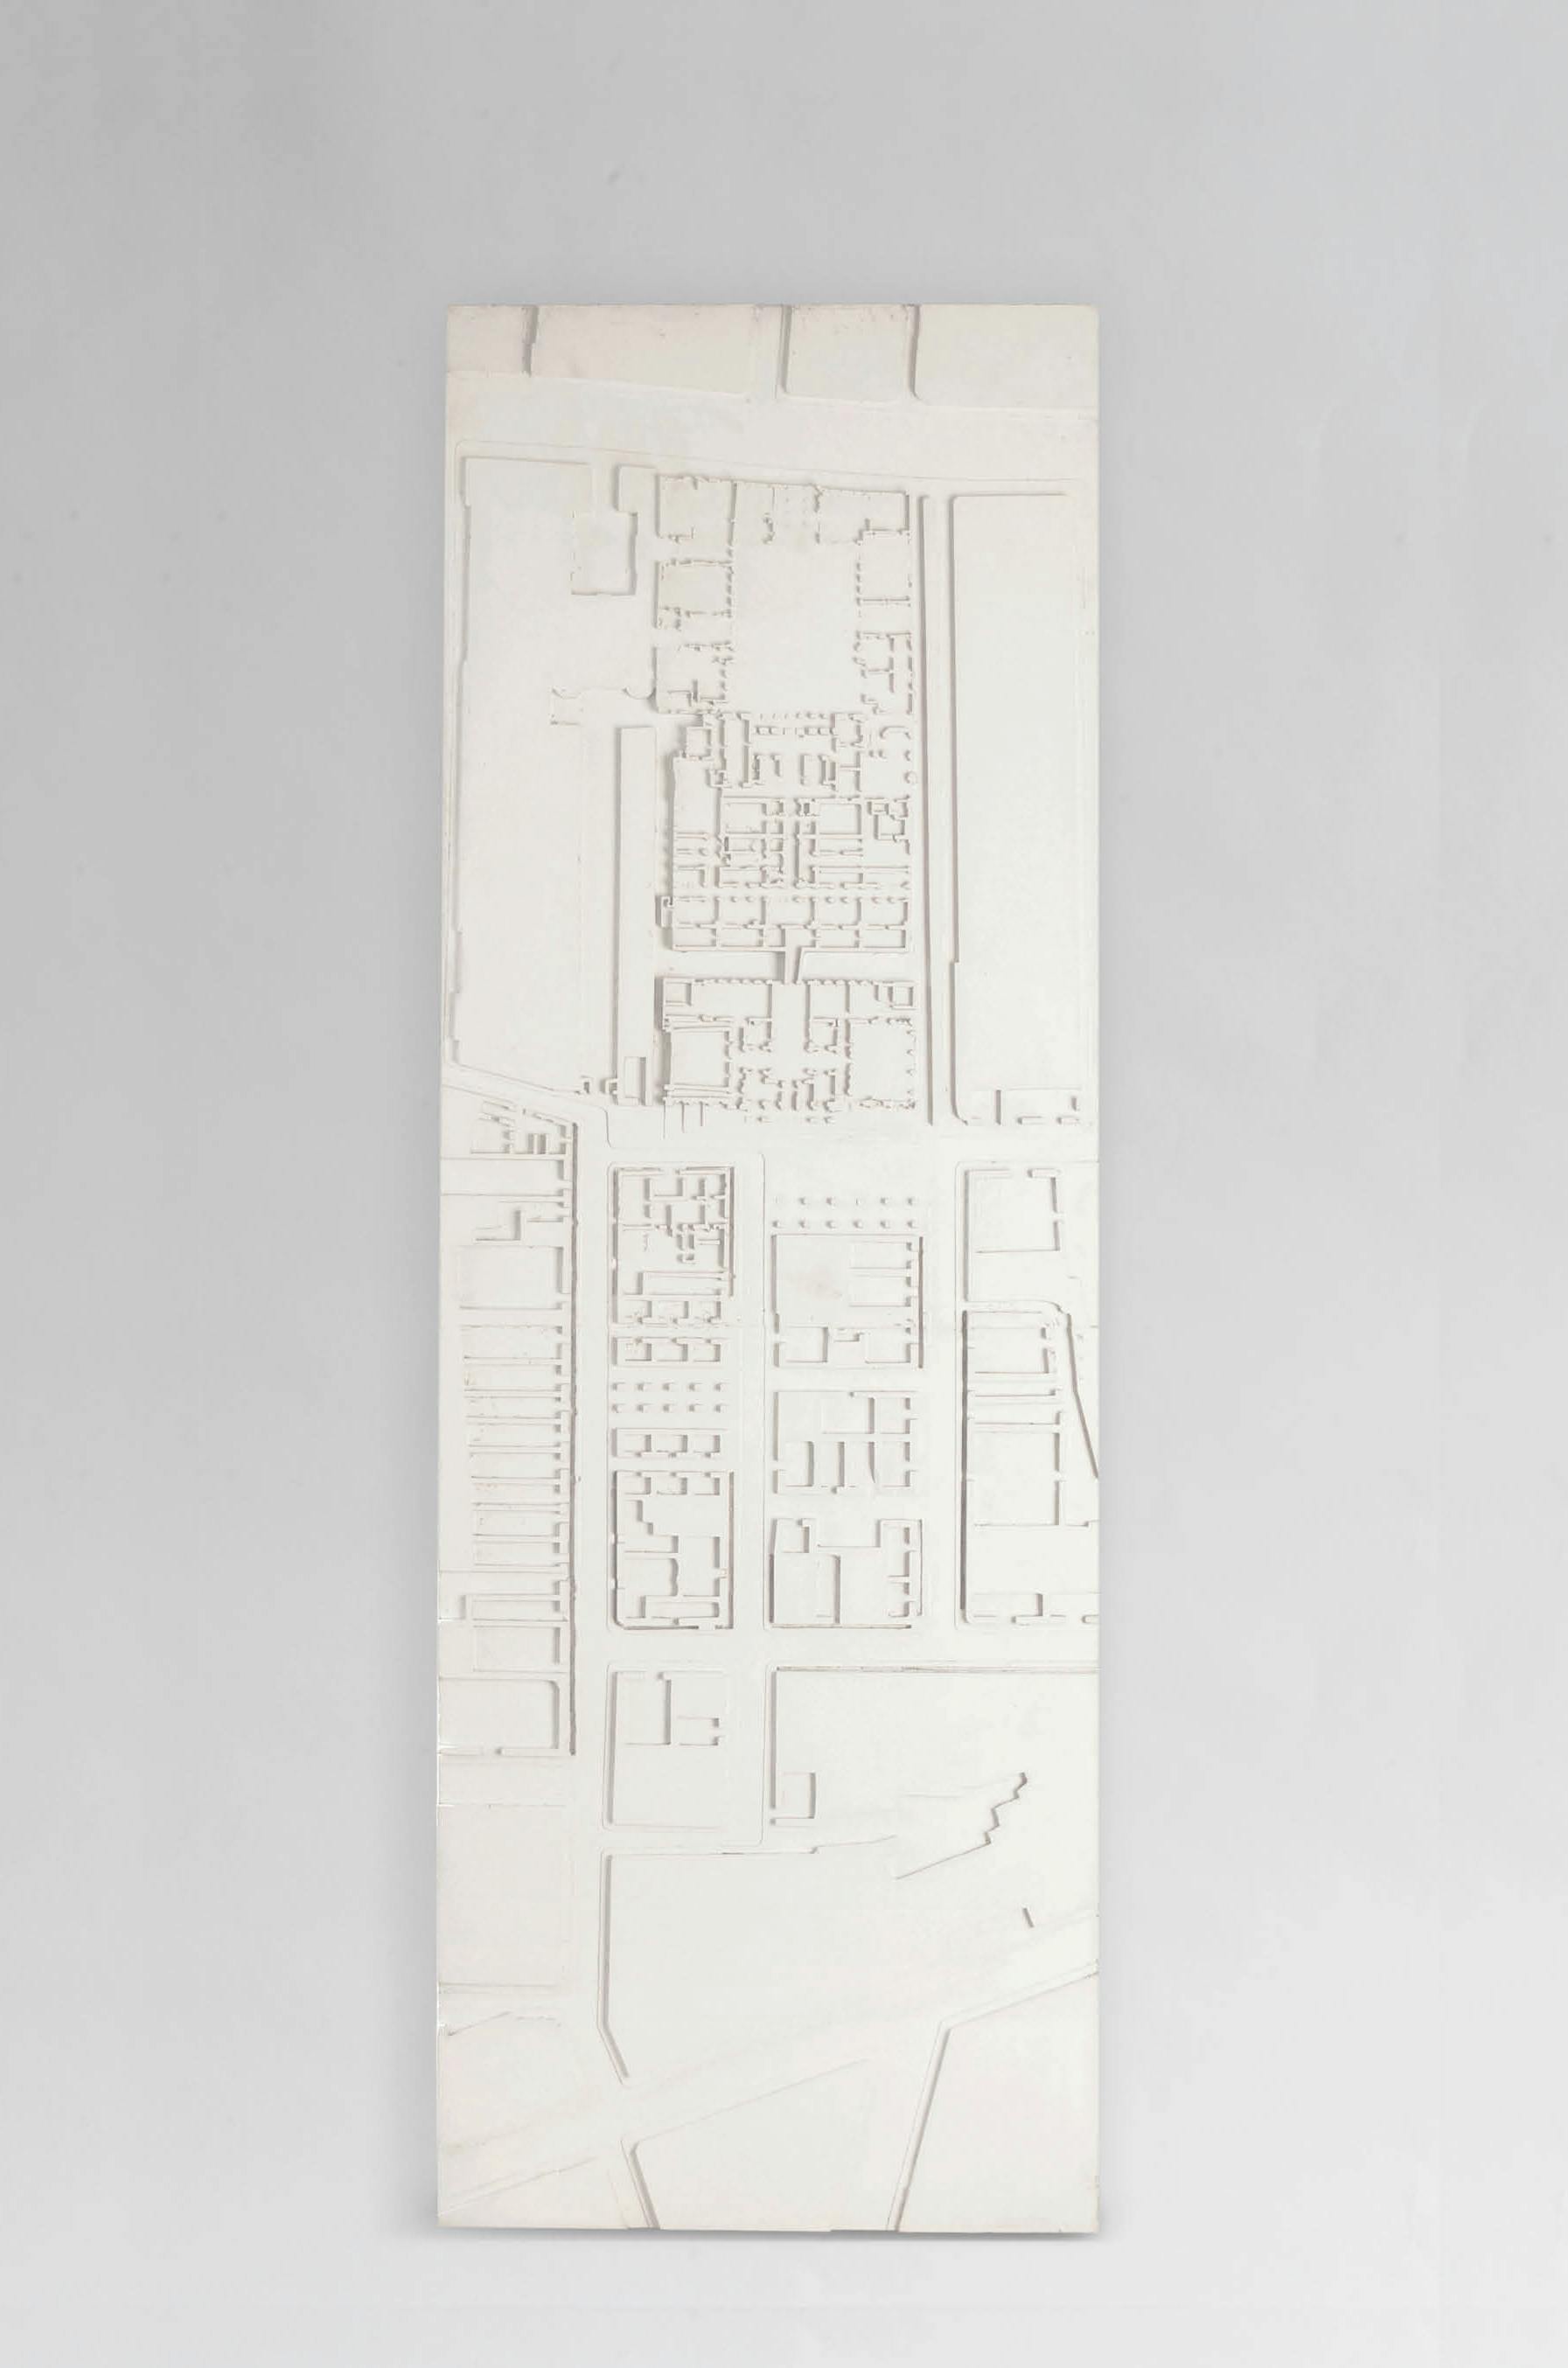 'Massing model produced for 'Reimagining Mayfair', Architects Journal and Royal Academy competition, with a team of Henry Coleman, Andrew Philips Architects  and Irene Djao-Rakatine for Vogt